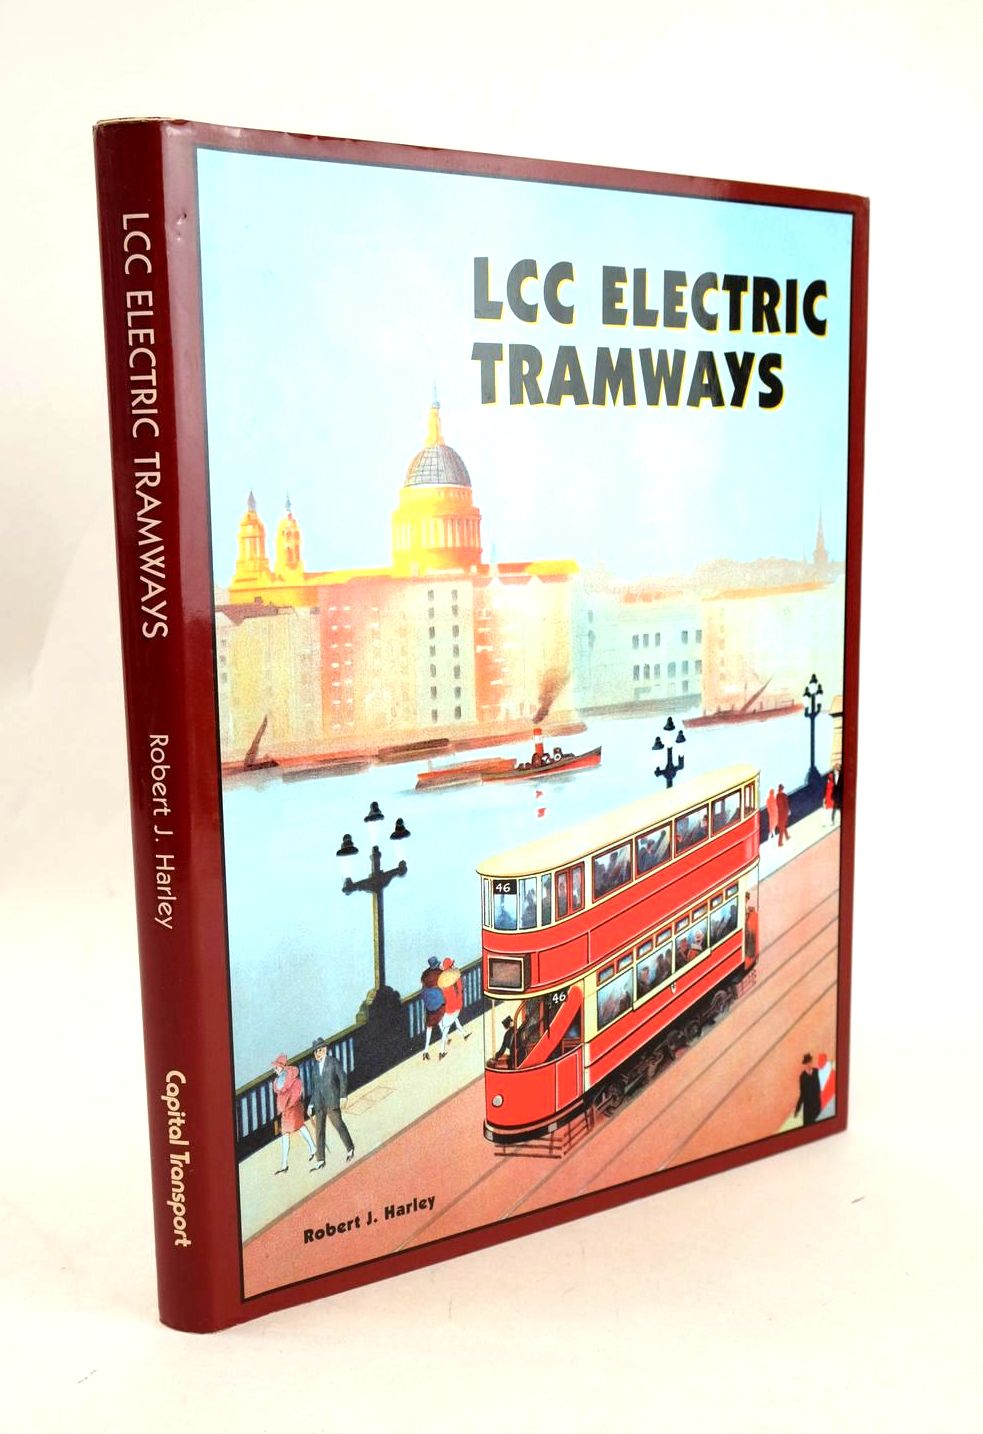 Photo of LCC ELECTRIC TRAMWAYS written by Harley, Robert J. published by Capital Transport (STOCK CODE: 1326968)  for sale by Stella & Rose's Books